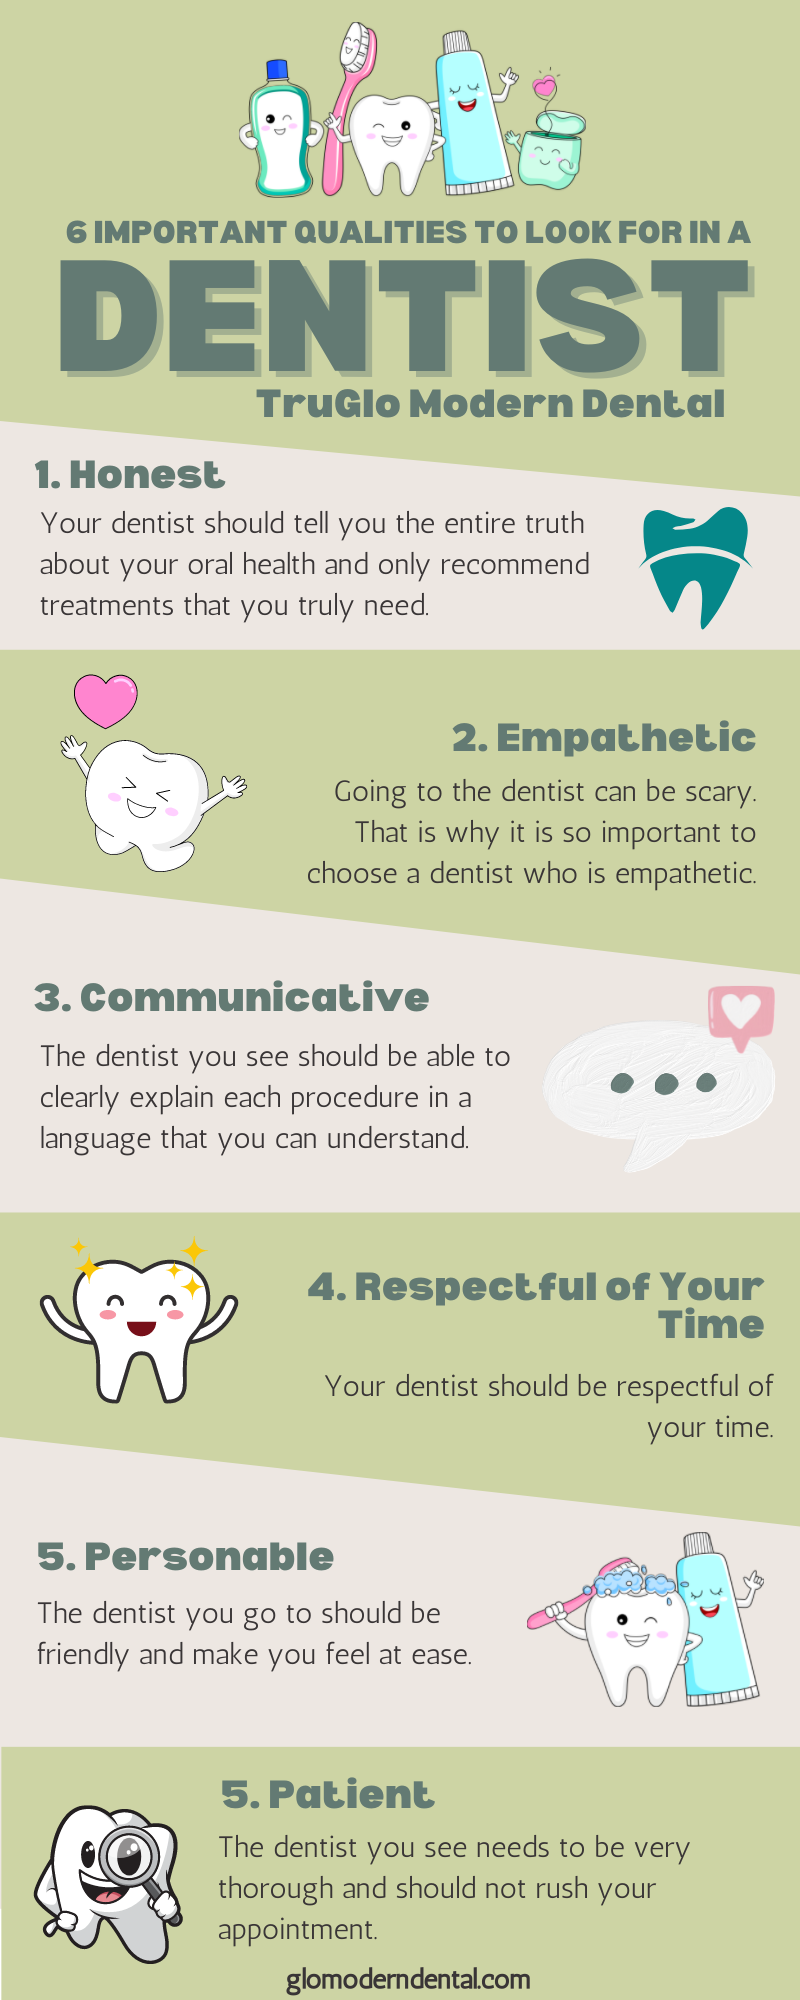 6 important qualities to look for in a dentist Infographic